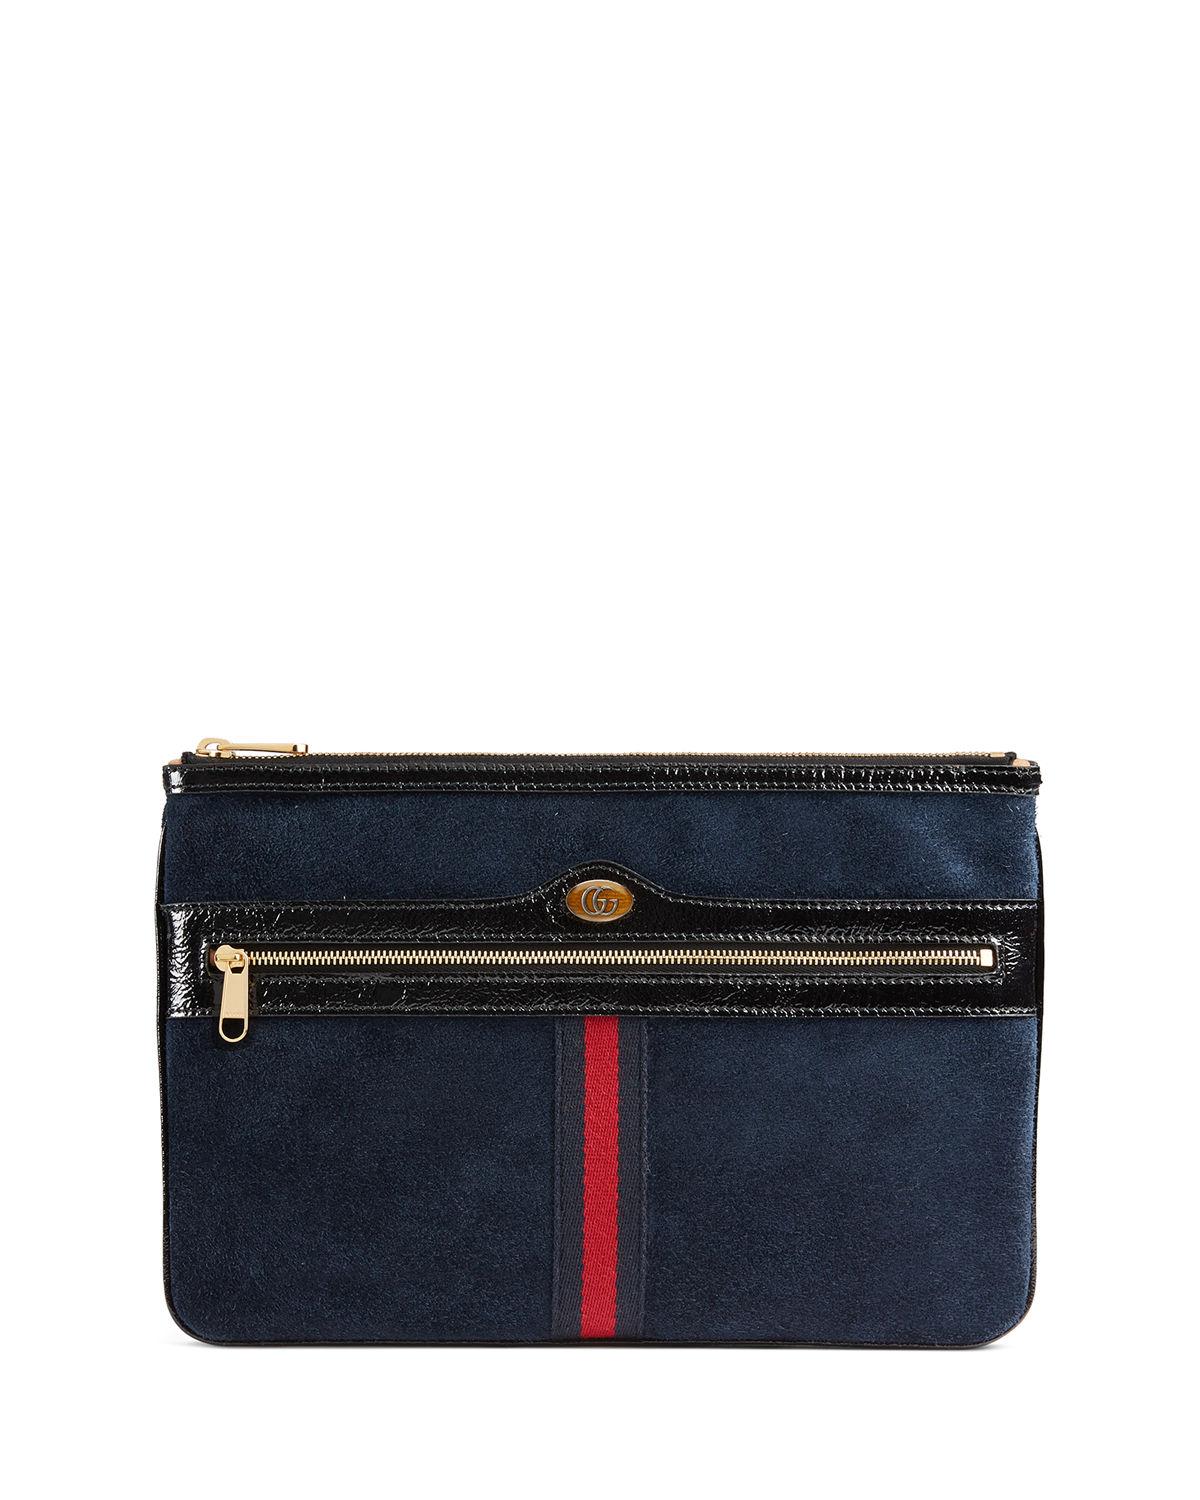 Gucci Ophidia Large Suede Clutch Bag in Blue - Lyst